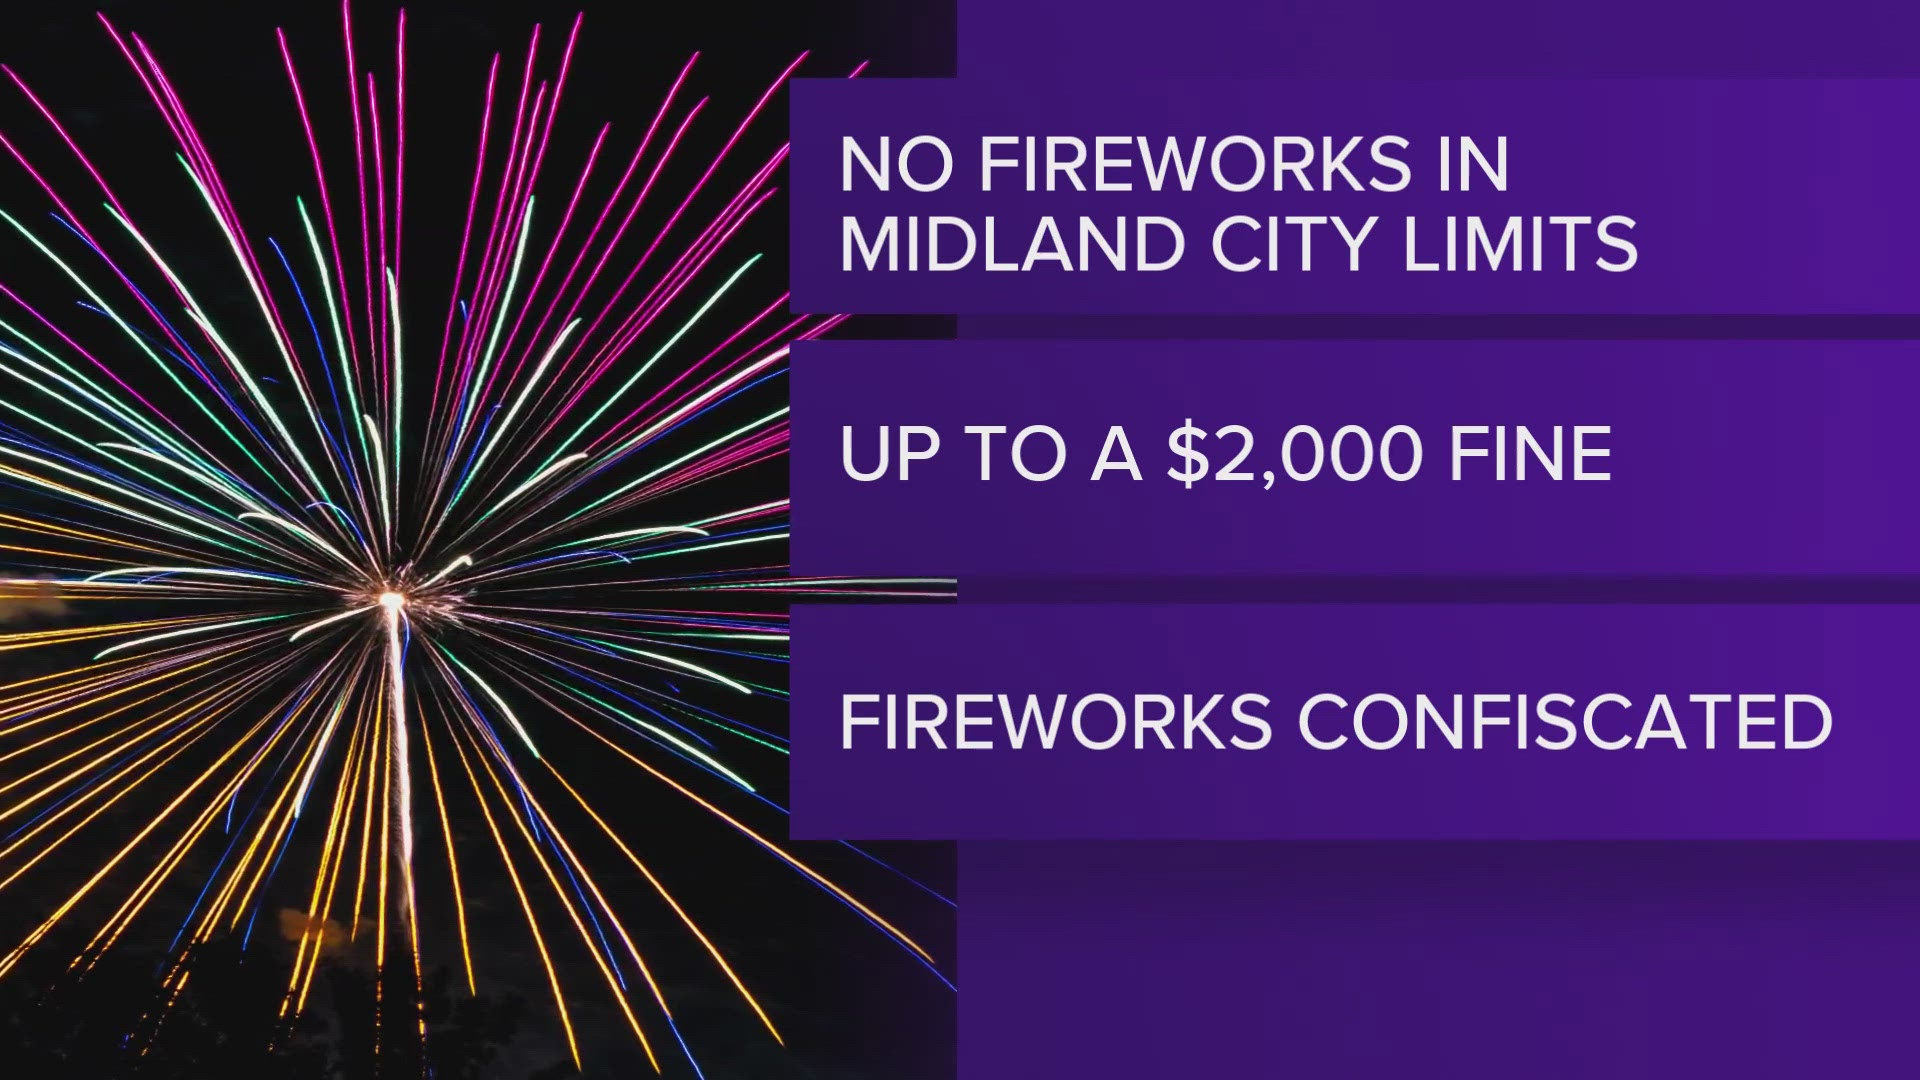 ​To report illegal fireworks, gunshots, or any other illegal activity, one can call anonymously by calling the Odessa Police Department at (432) 333-3641.